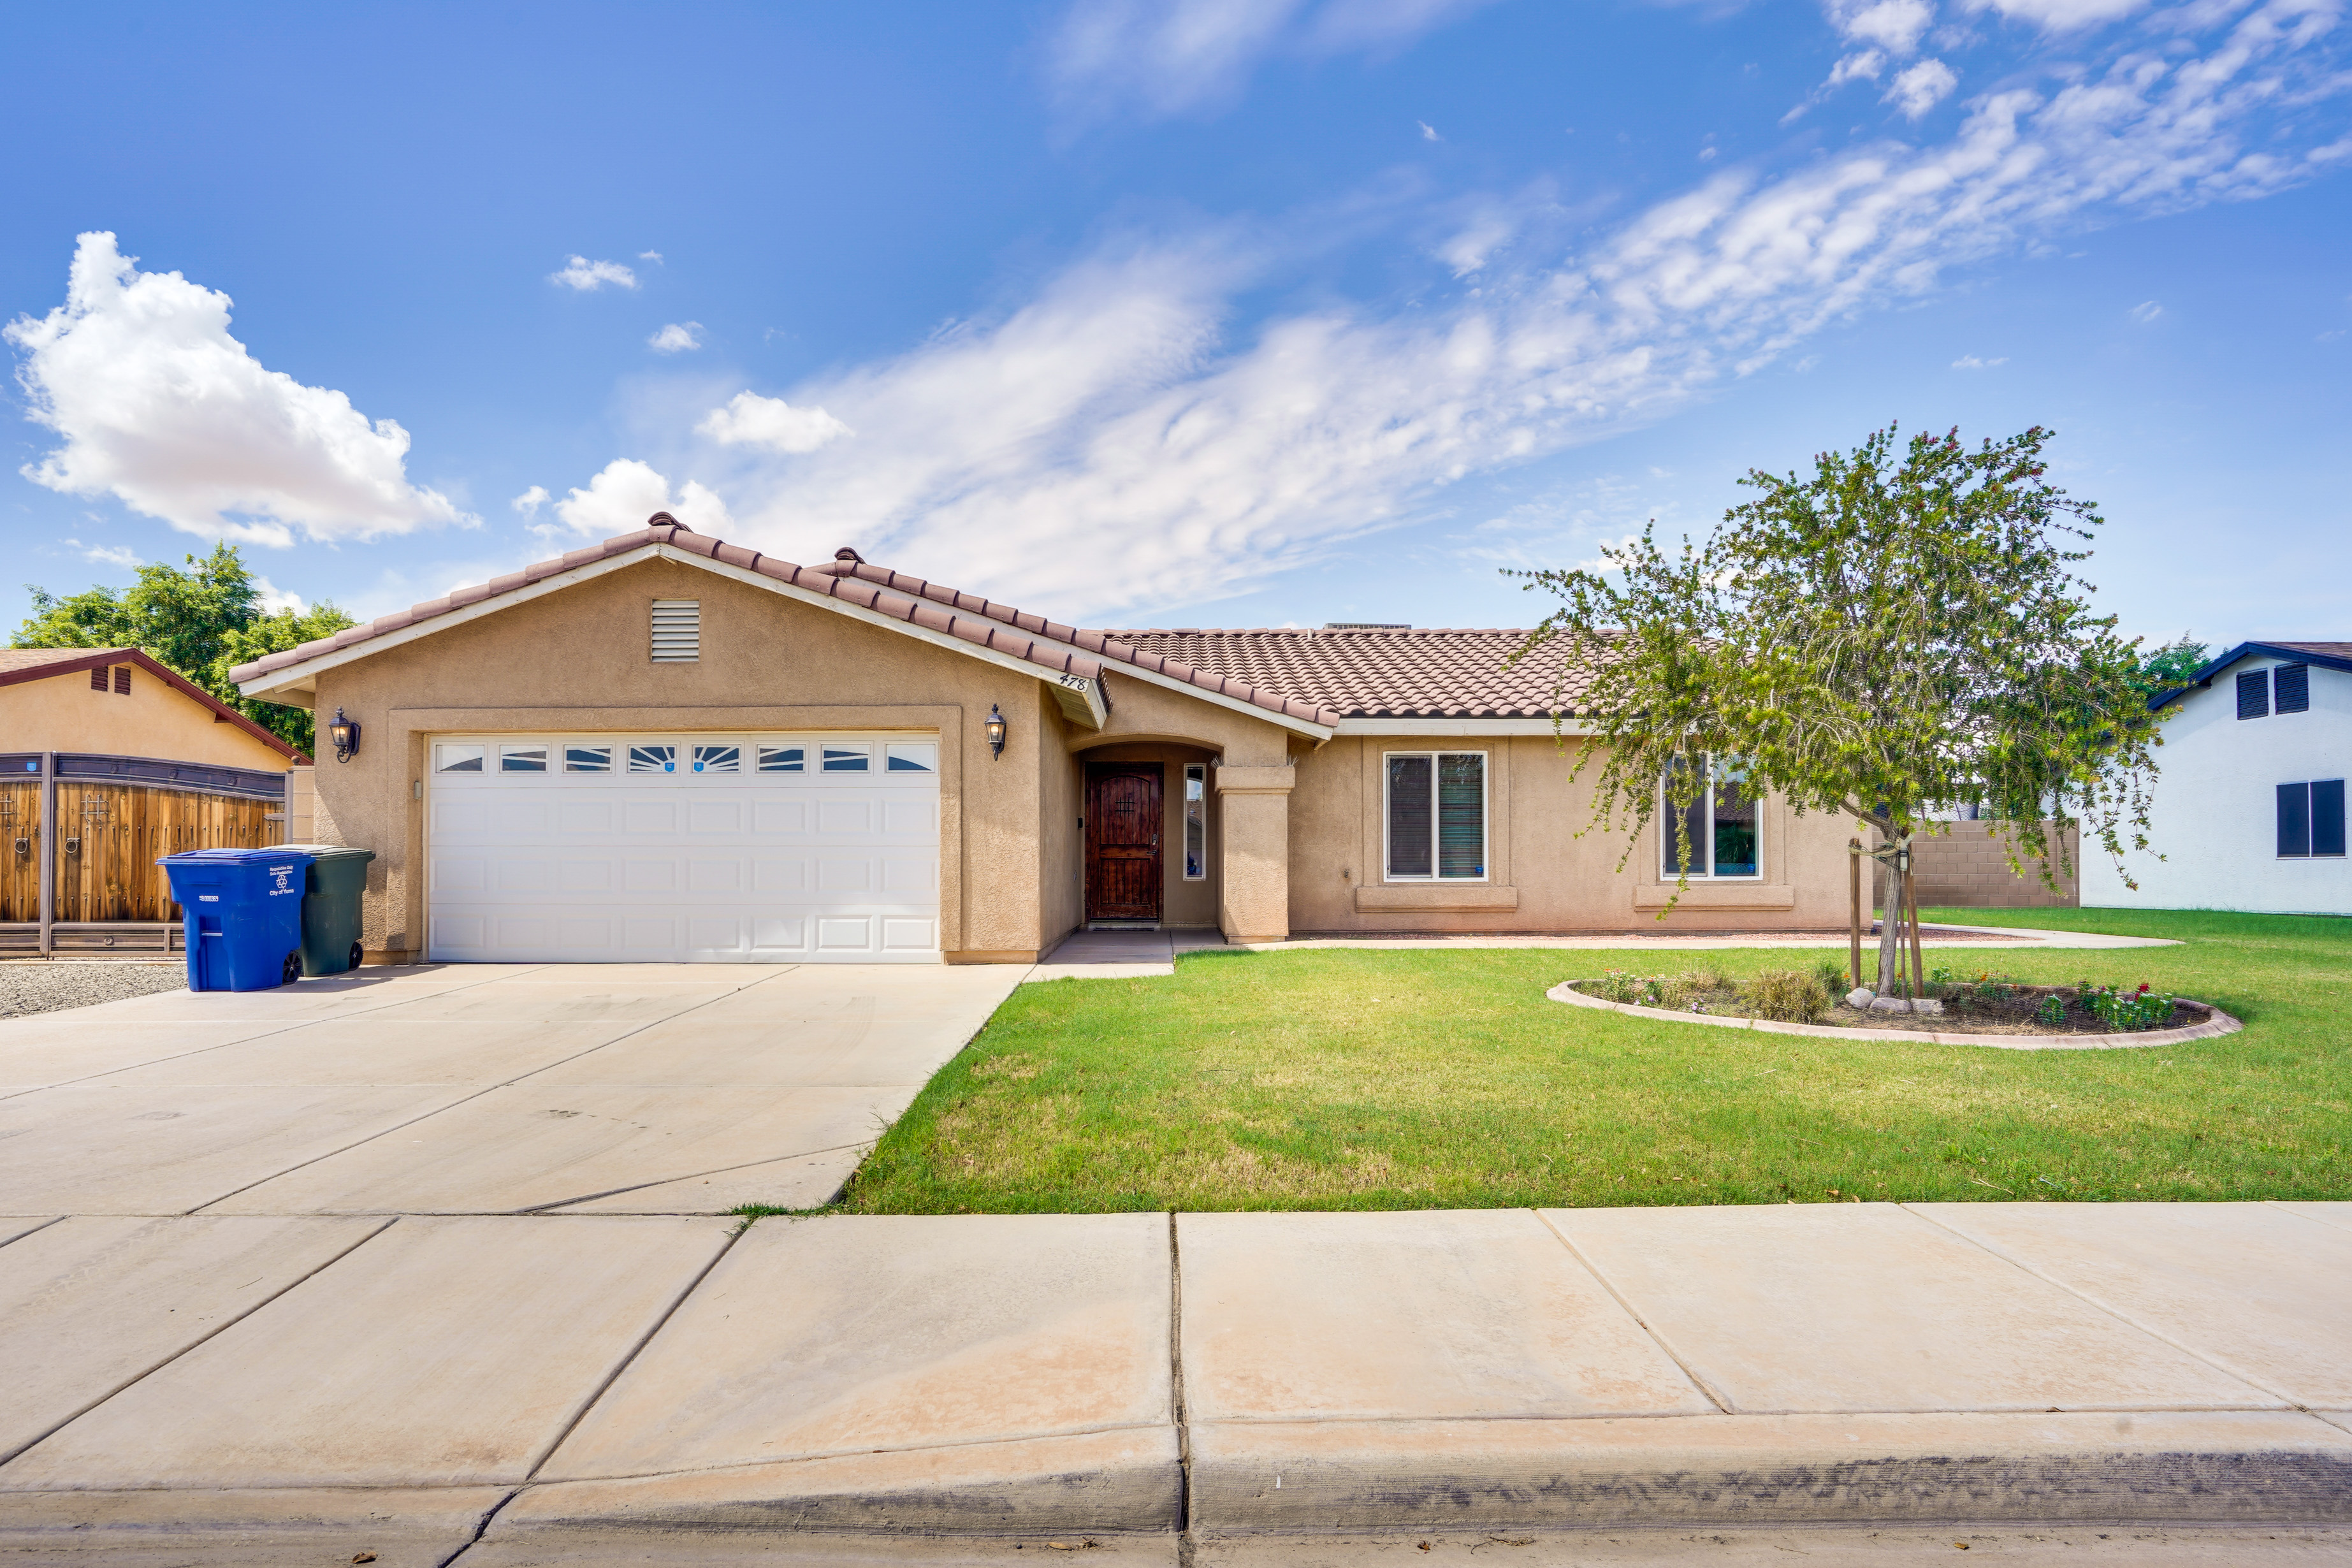 Property Image 1 - Yuma Family Home w/ Covered Patio + Grill!